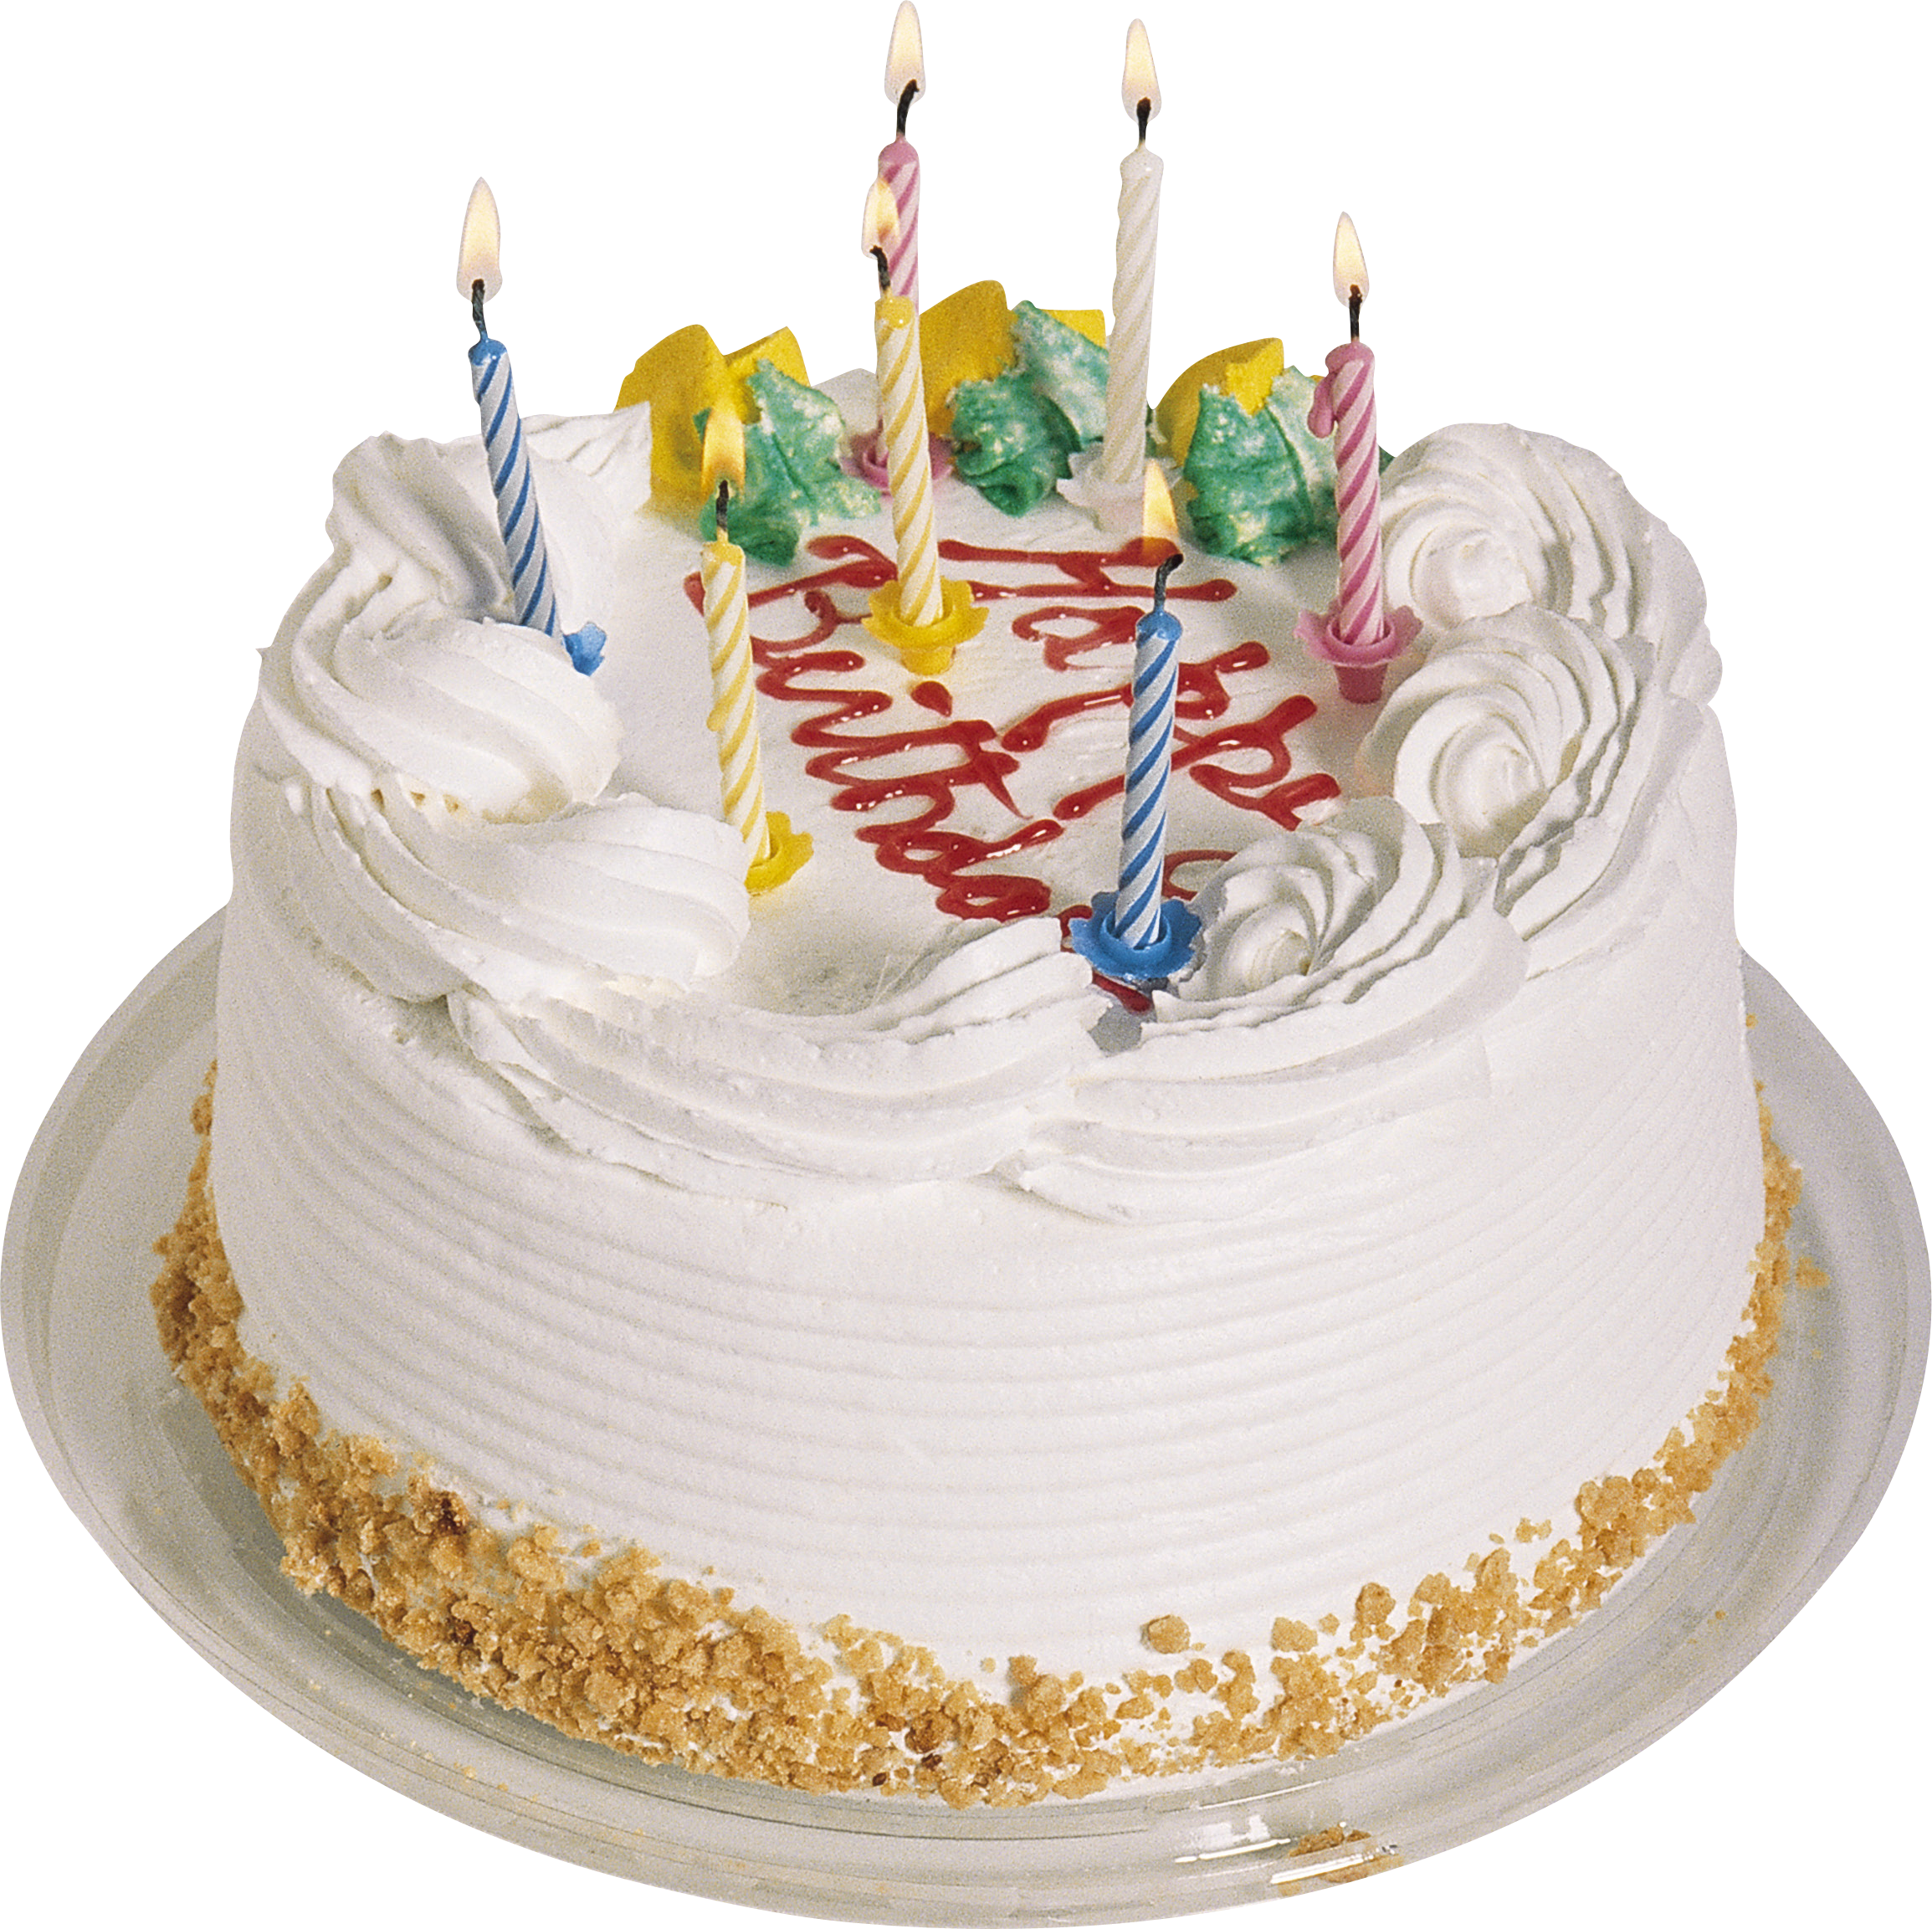 Birthday Cake Clipart Candle - Birthday Cake Clip Art Transparent Background  - Free Transparent PNG Download - PNGkey